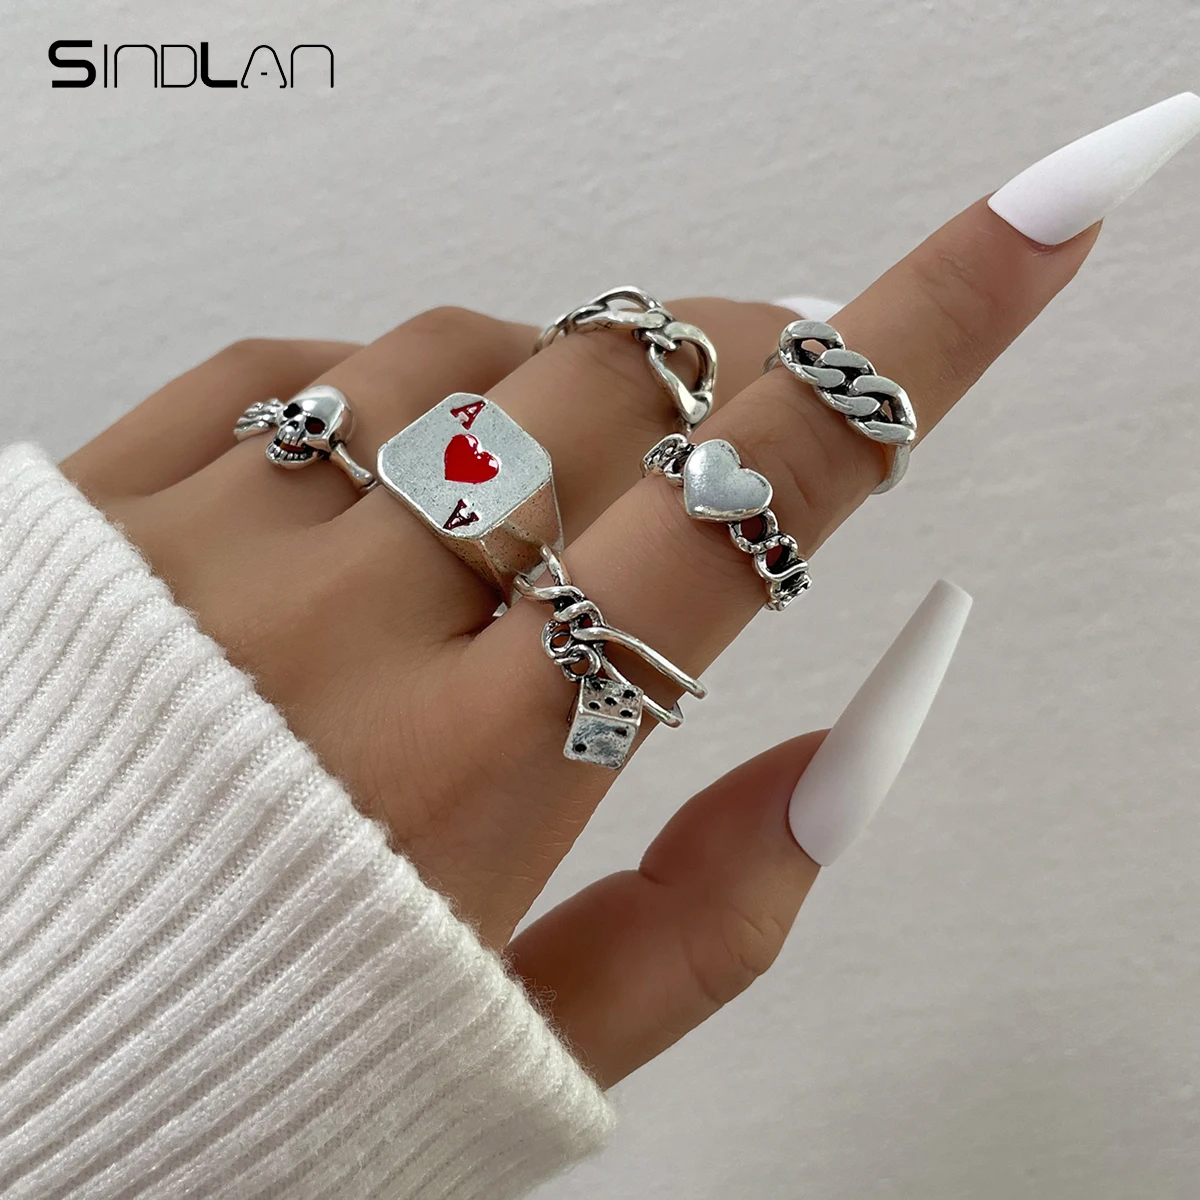 

Sindlan 7Pcs Punk Silver Color Heart Rings for Women Gothic Skeleton Poker Strange Things Couple Emo Jewelry Anillos Mujer Bague